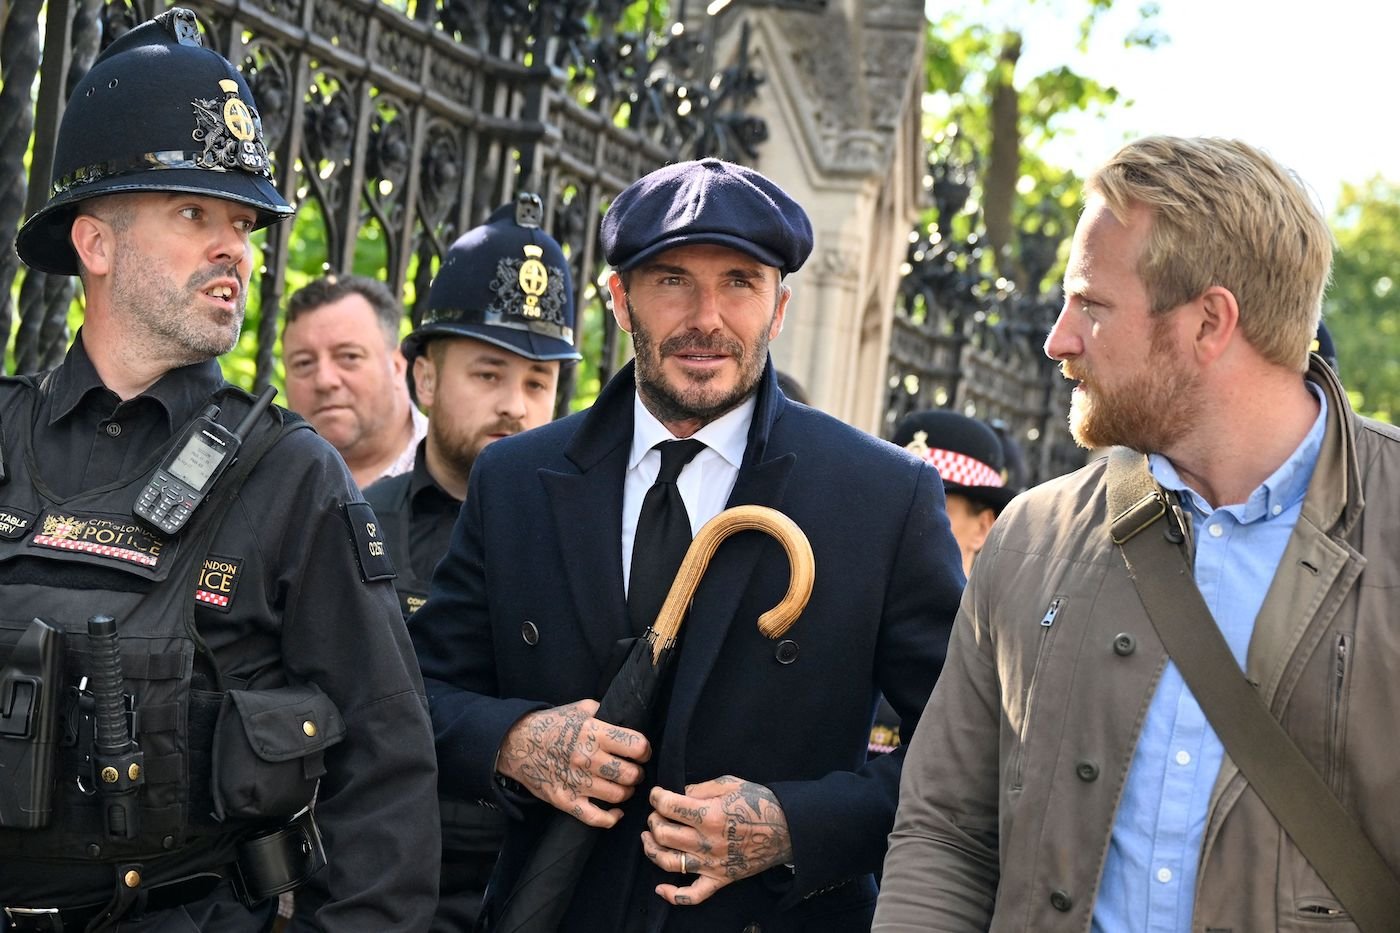 David Beckham leaves Westminster Hall after paying respects to Queen Elizabeth II as she was lying in state